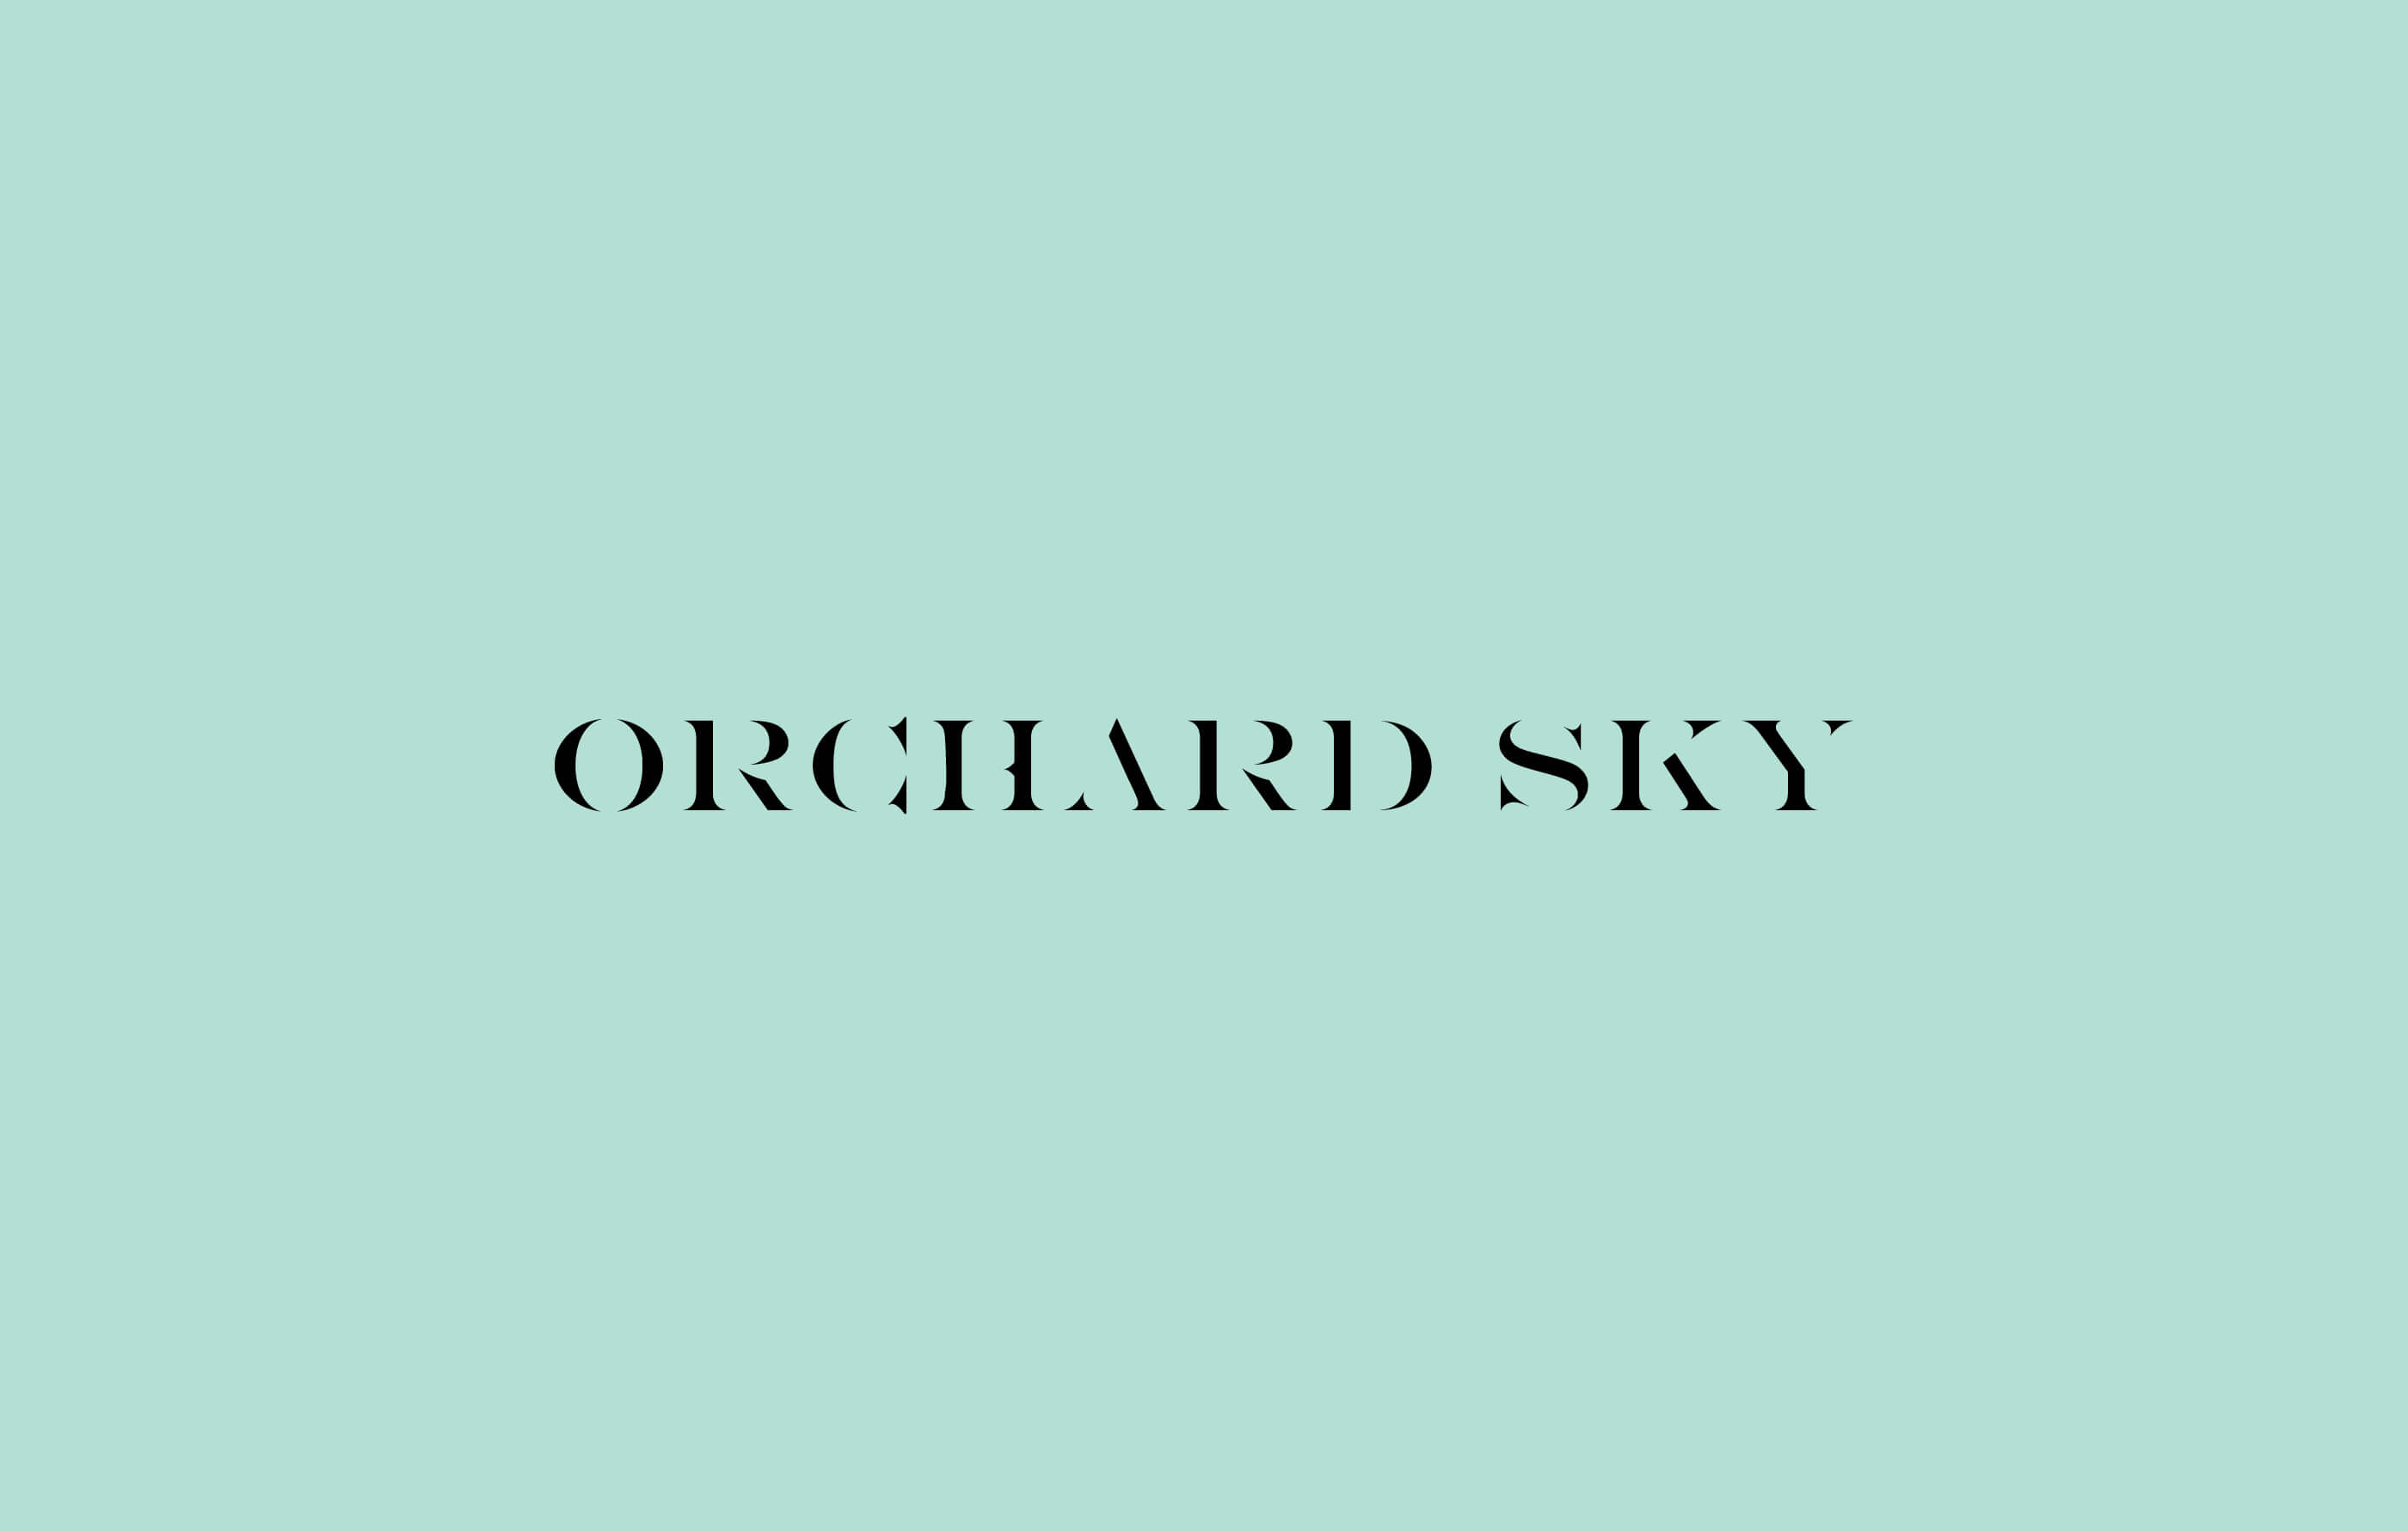 'Orchard Sky' logo in black capital letters on a mint background